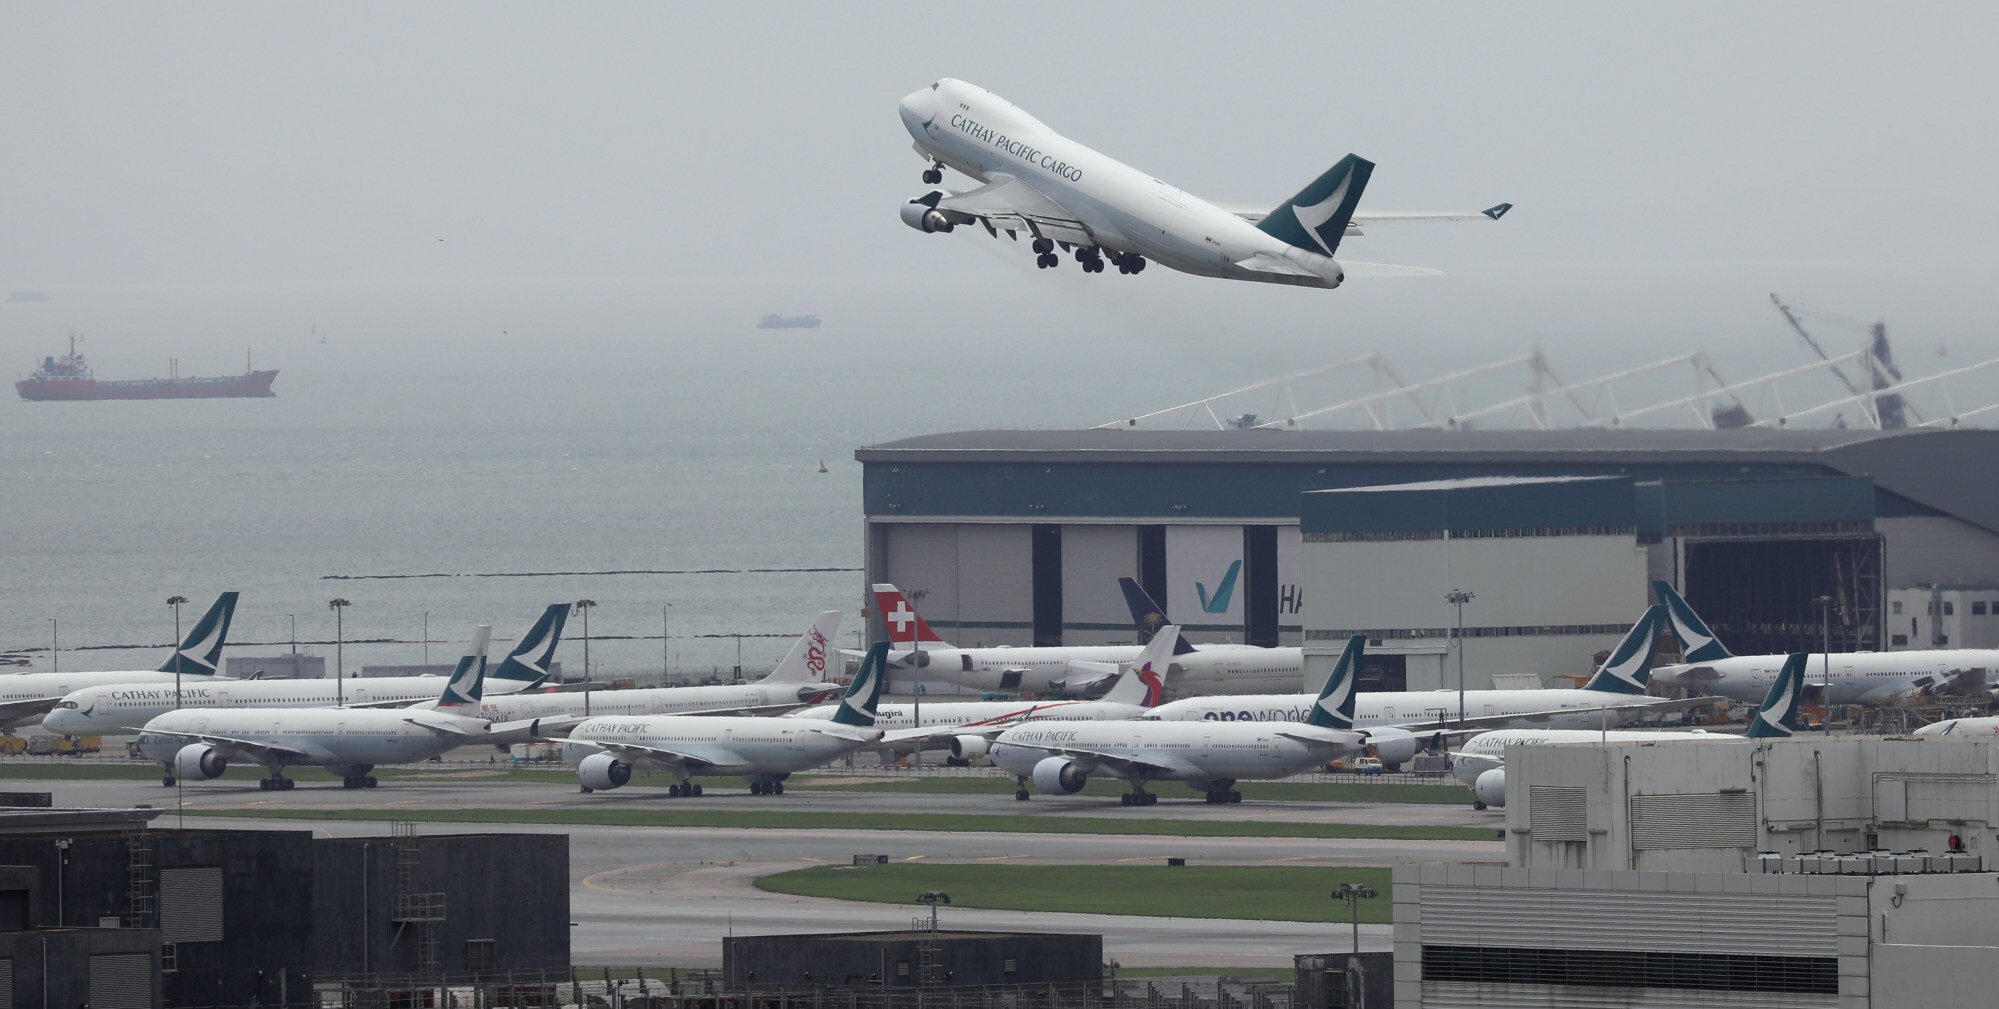 A Cathay Pacific cargo plane takes off from the Hong Kong International Airport in this file photo from June 2020. Photo: Sam Tsang